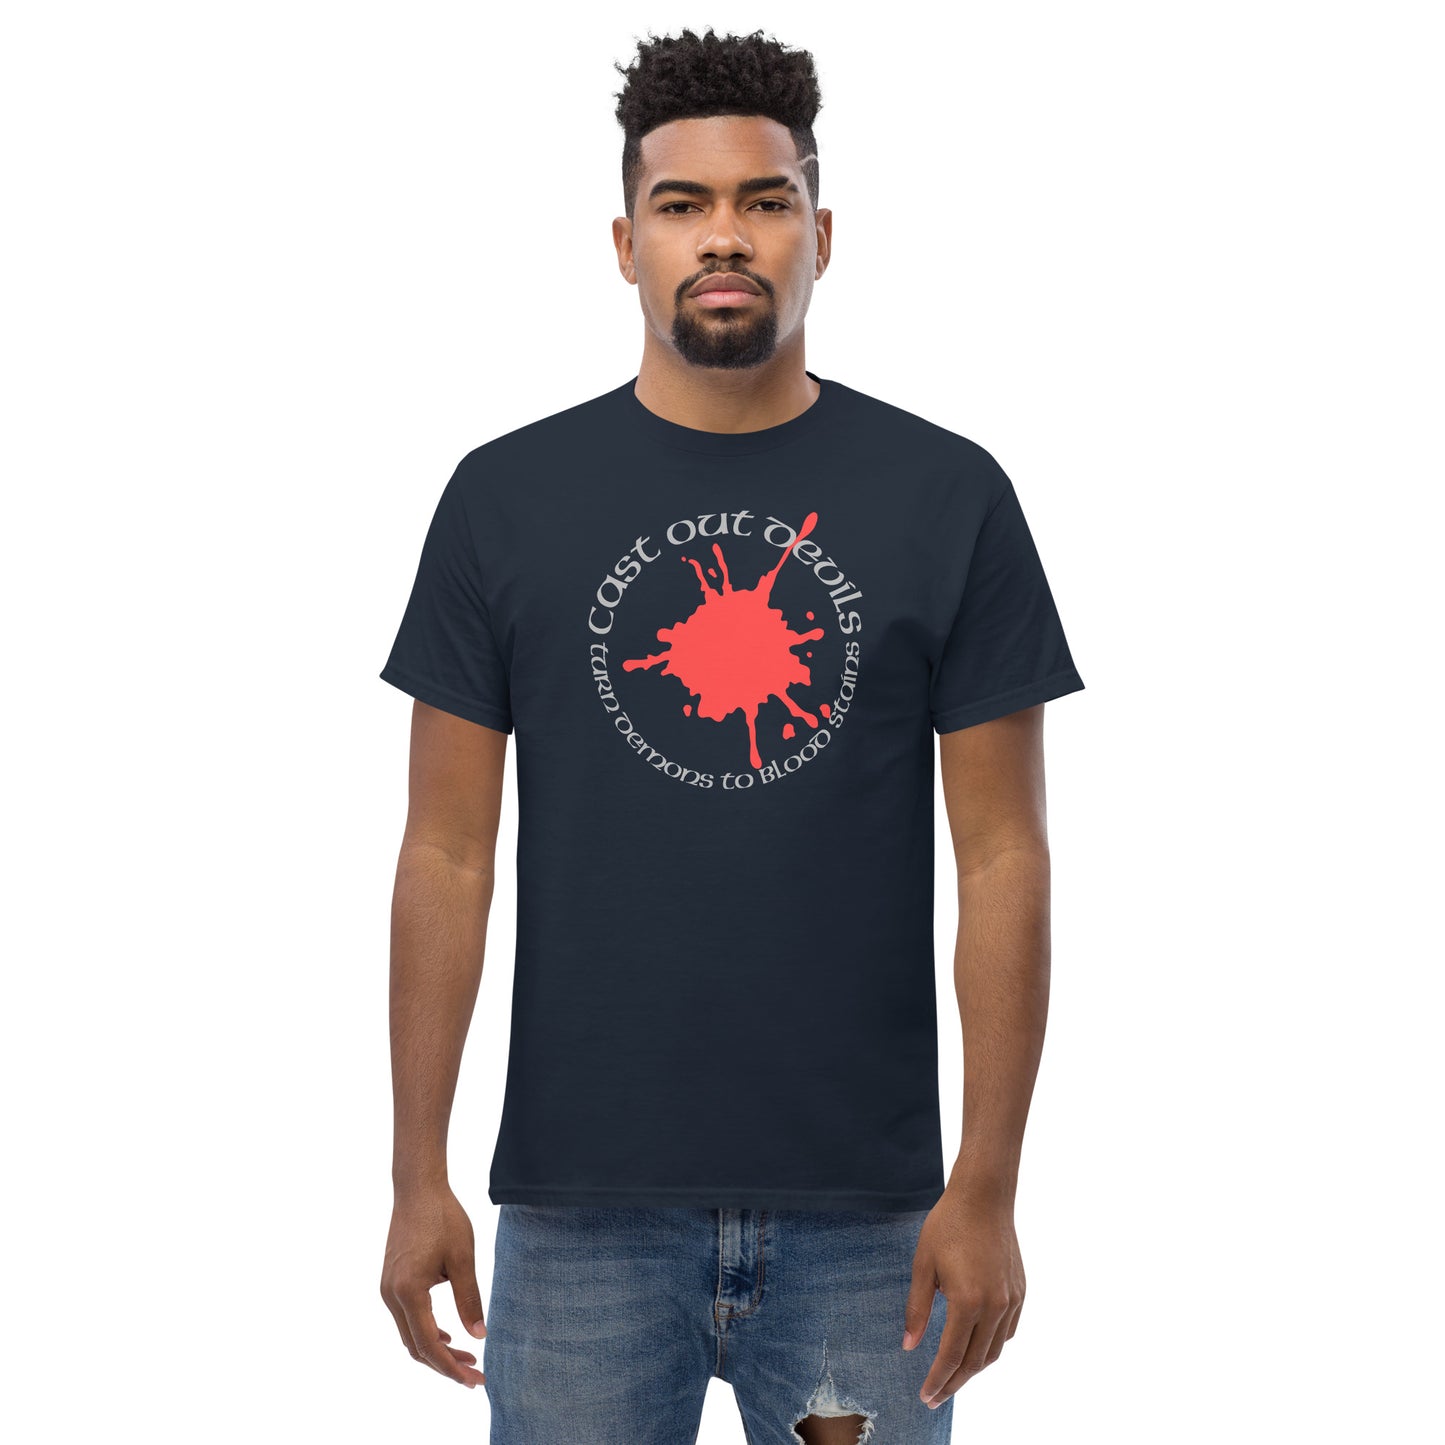 Cast Out Devils Turn Demons To Blood Stains Men's classic tee